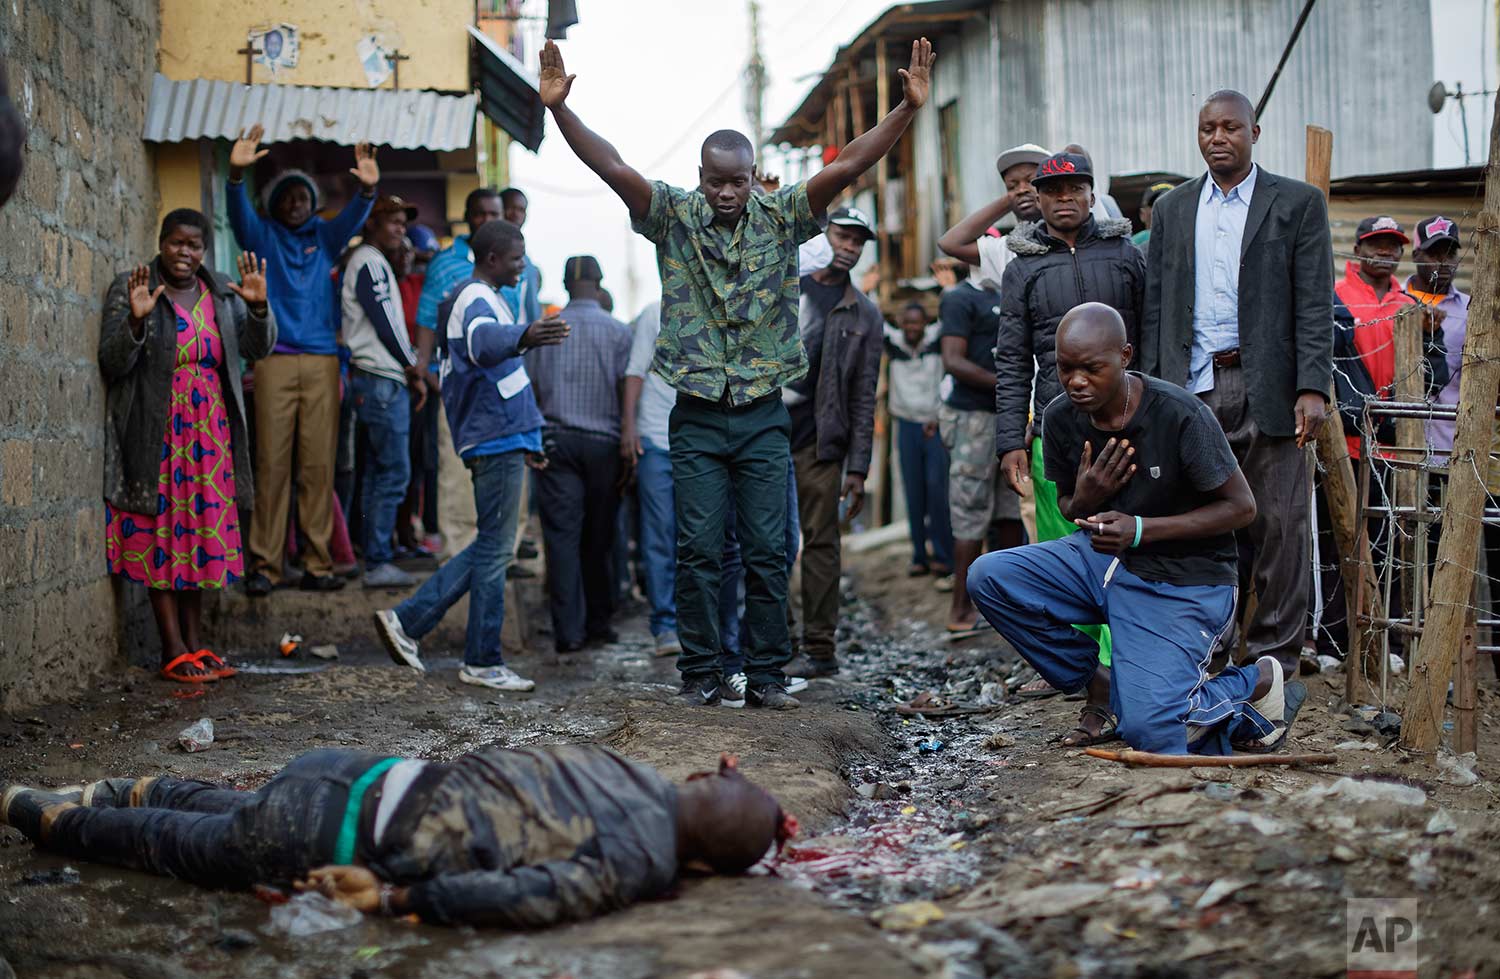  In this Wednesday, Aug. 9, 2017 photo, residents hold their hands up in the air towards police, as a man genuflects, right, next to the body of a man who had been shot in the head and who the crowd claimed had been shot by police, in the Mathare slu